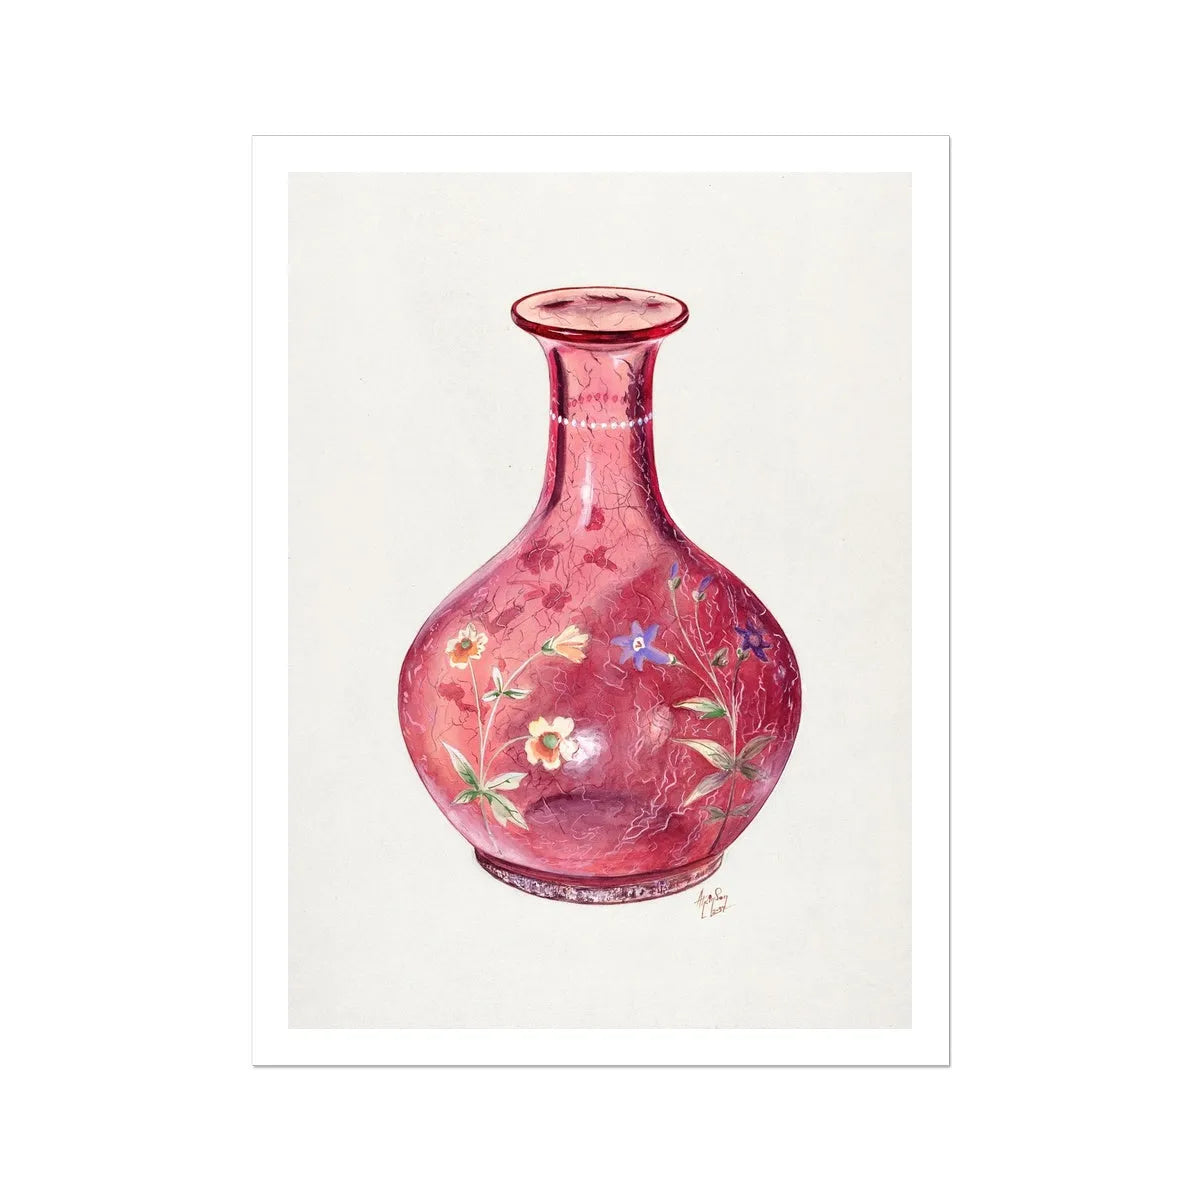 Hand Painted Carafe By Ralph Atkinson Fine Art Print - 24’x32’ - Posters Prints & Visual Artwork - Aesthetic Art